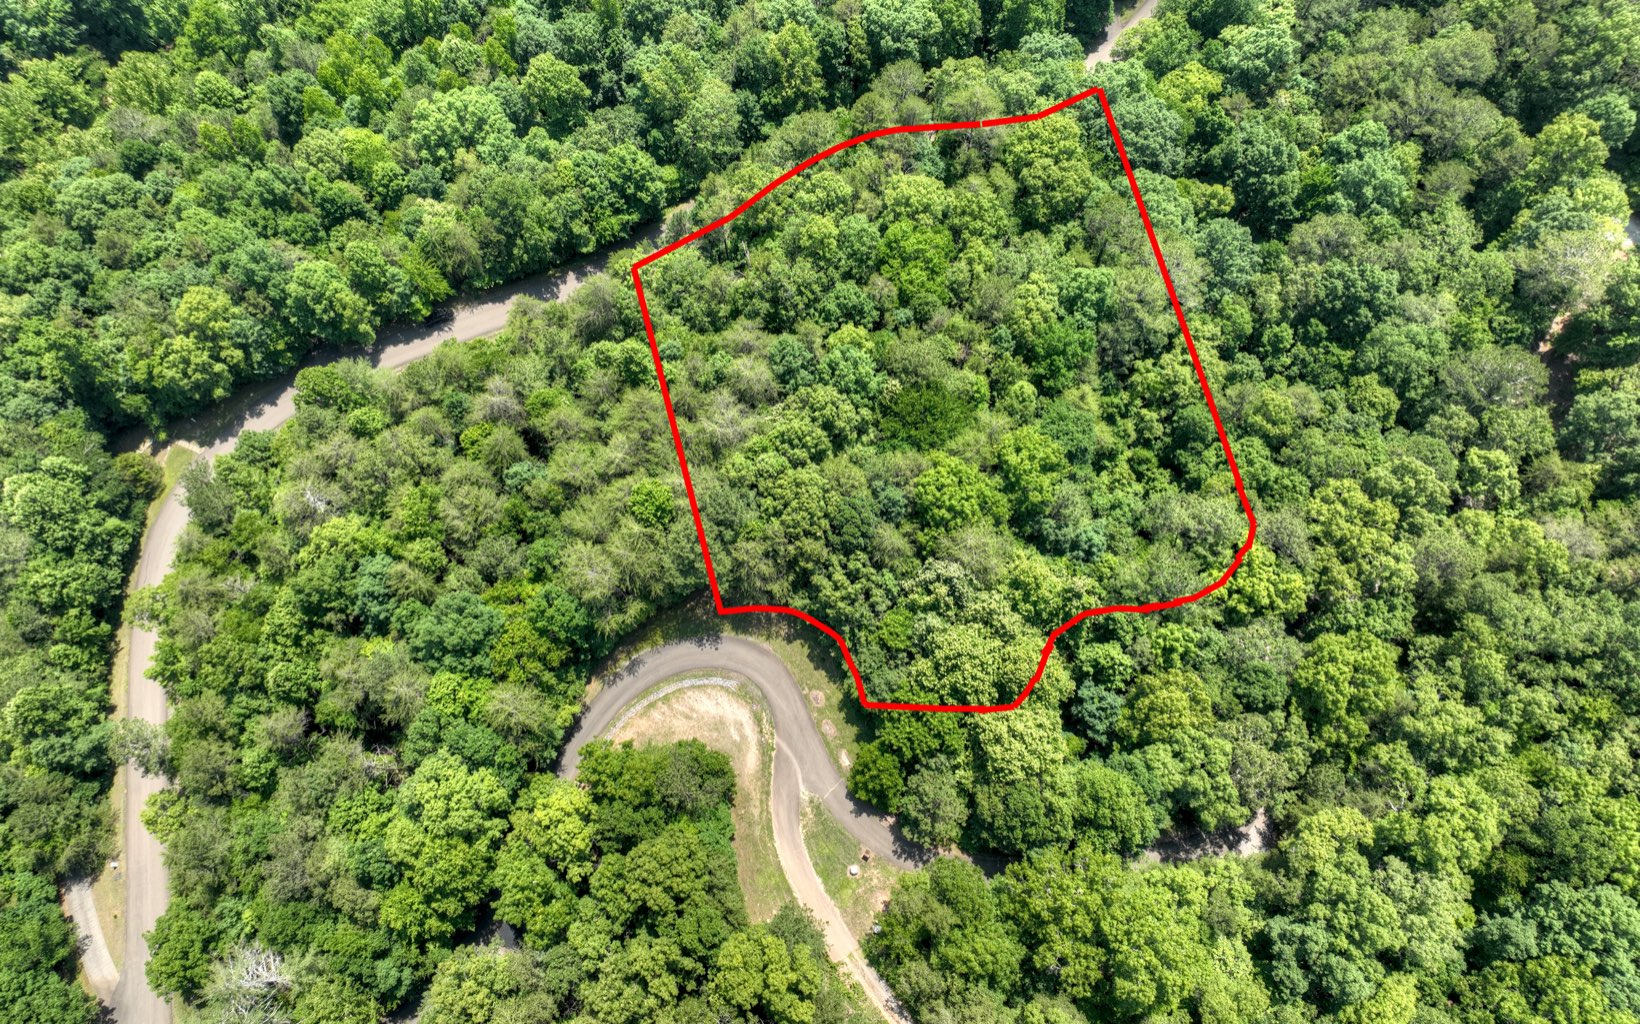 Beautiful 3.08 acre lot in the upscale gated community of Mountain Creek Hollow. This wooded lot is ready to build your dream home with road frontage on upper and lower sides. This subdivision is nestled in the foothills of the North Georgia Mountains and includes amenities such as a trout pond, butterfly garden, waterfalls, hiking trails, and a covered bridge with a neighborhood picnic area beside the noisy Fausett Creek, which runs throughout this private community. There are approximately 275 acres of rolling scenic and wooded mountains and streams throughout the neighborhood. It is close to vineyards, as well as Ellijay restaurants, movie theater, and shopping. This lot would be the perfect lot to build your full time home in a peaceful area you are sure to fall in love with!